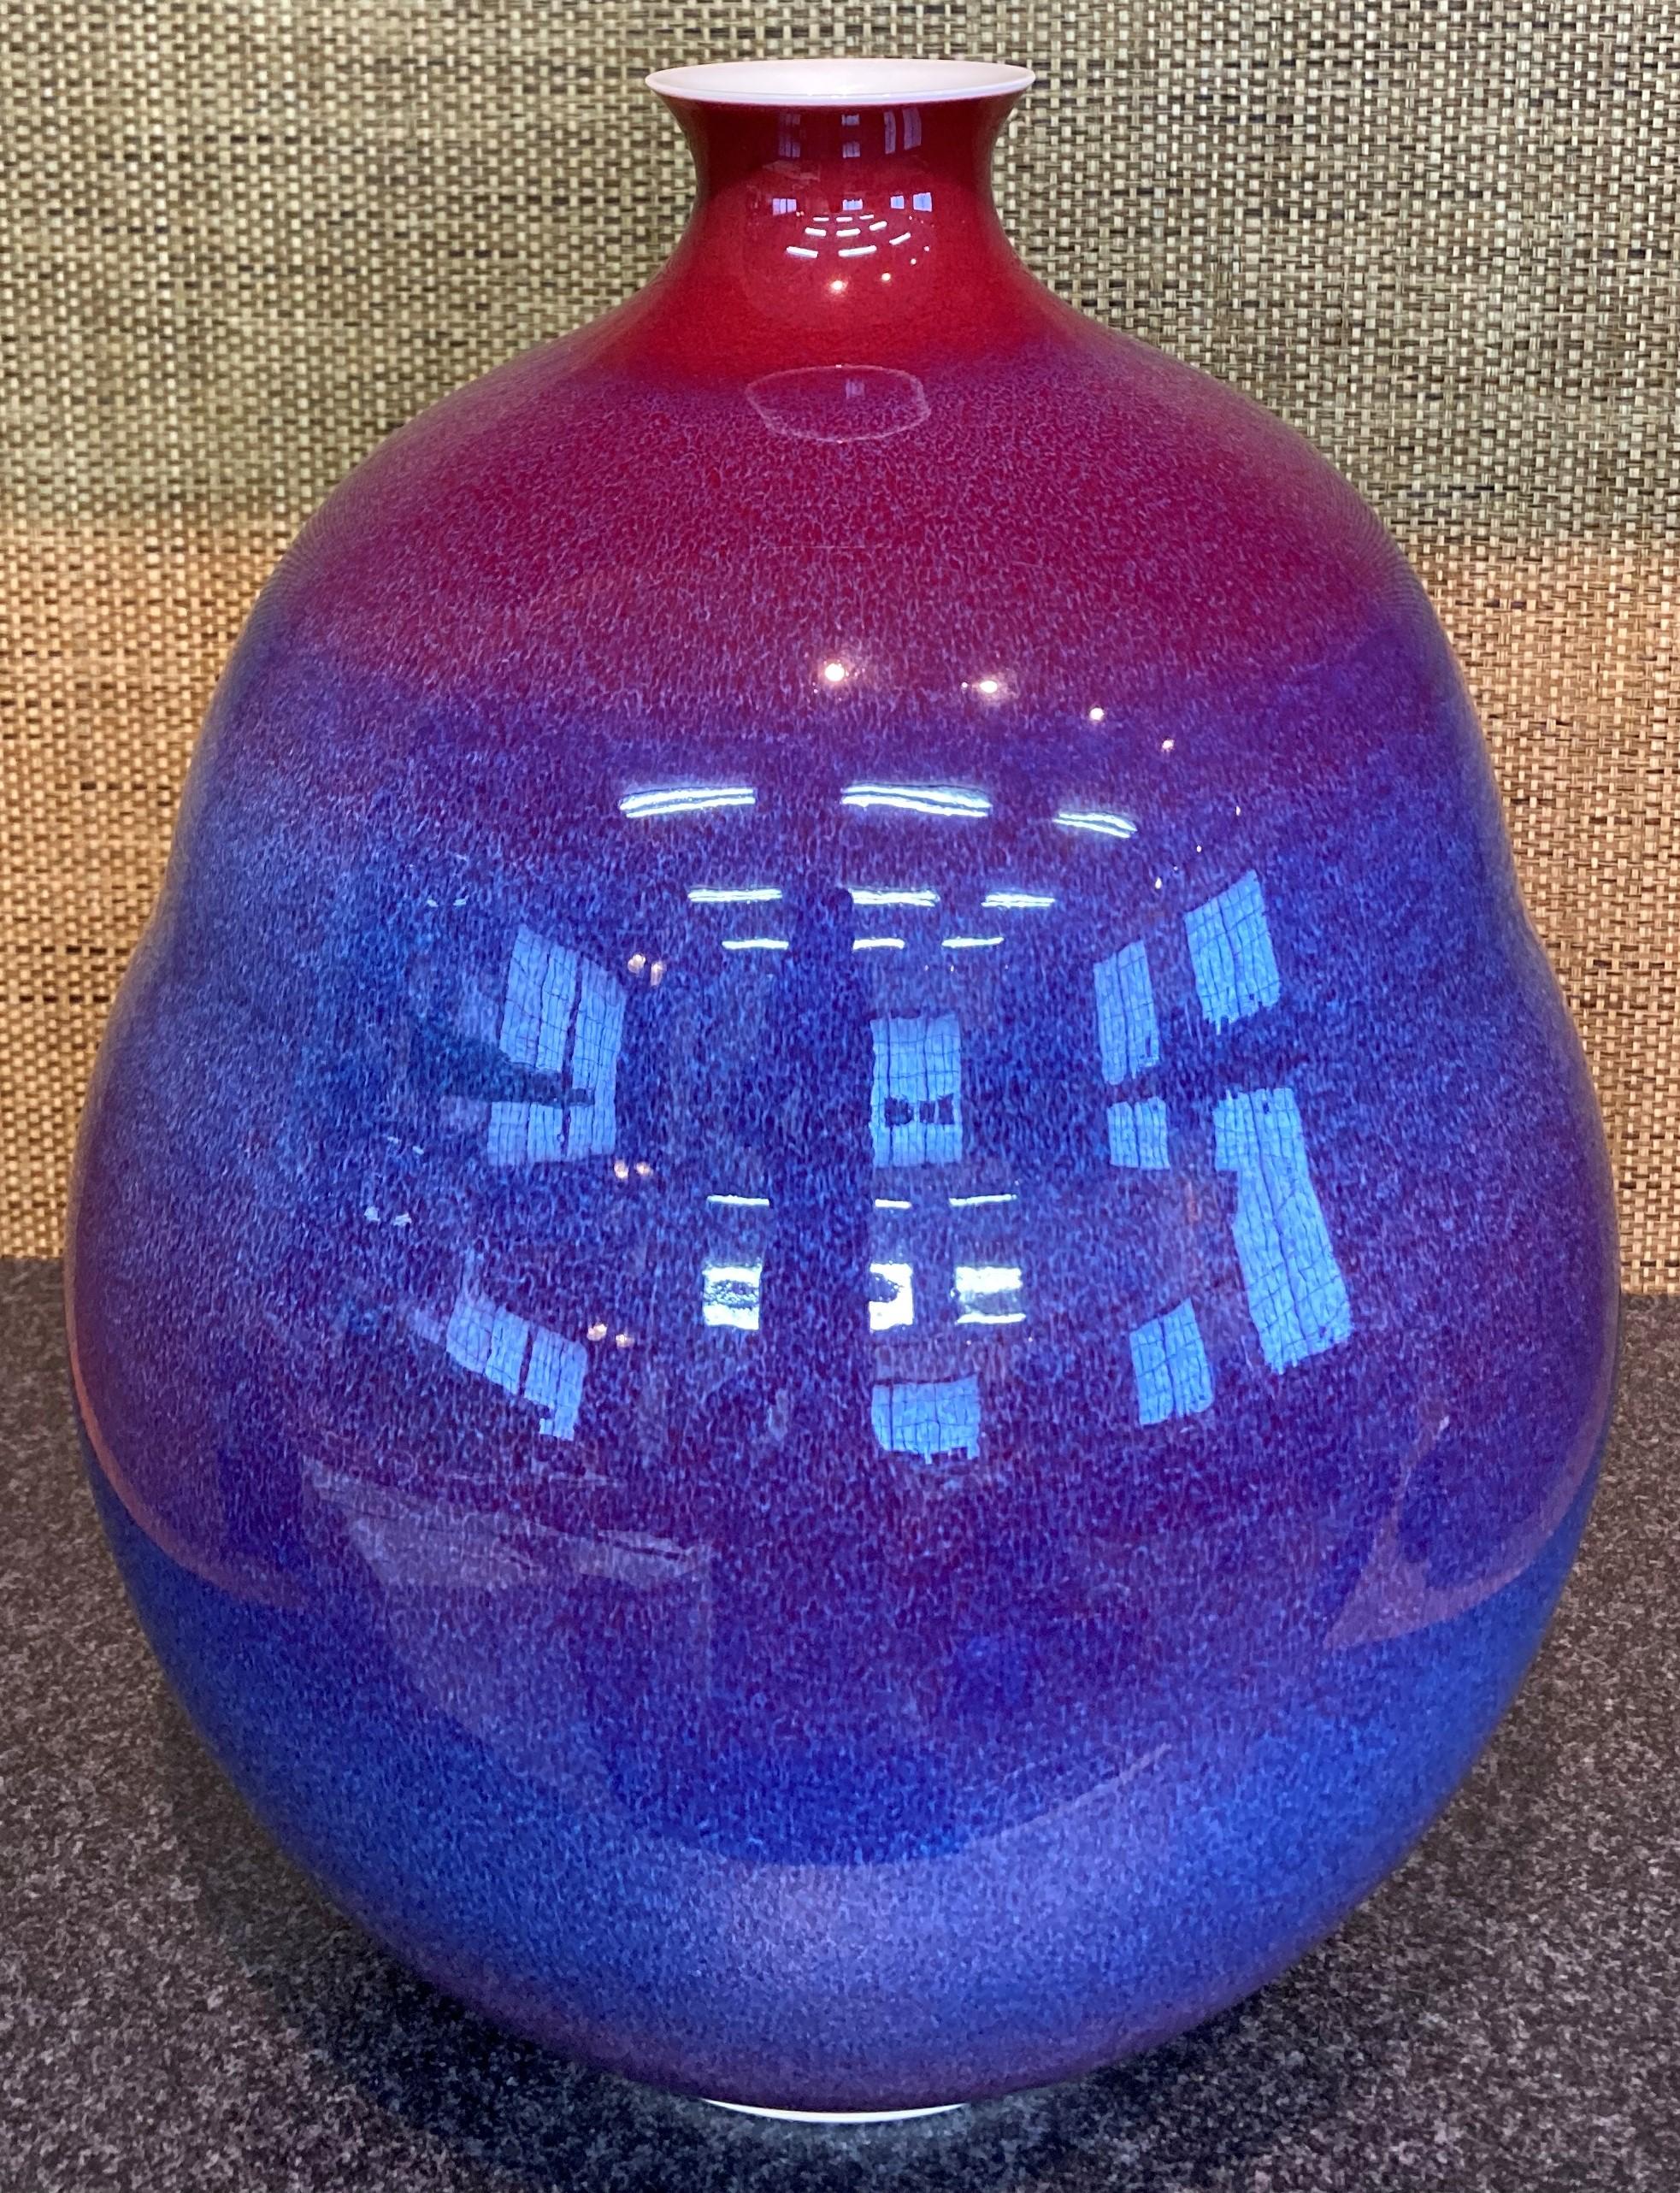 Japanese Contemporary Red and Blue Hand-Glazed Porcelain Vase by Master Artist For Sale 3